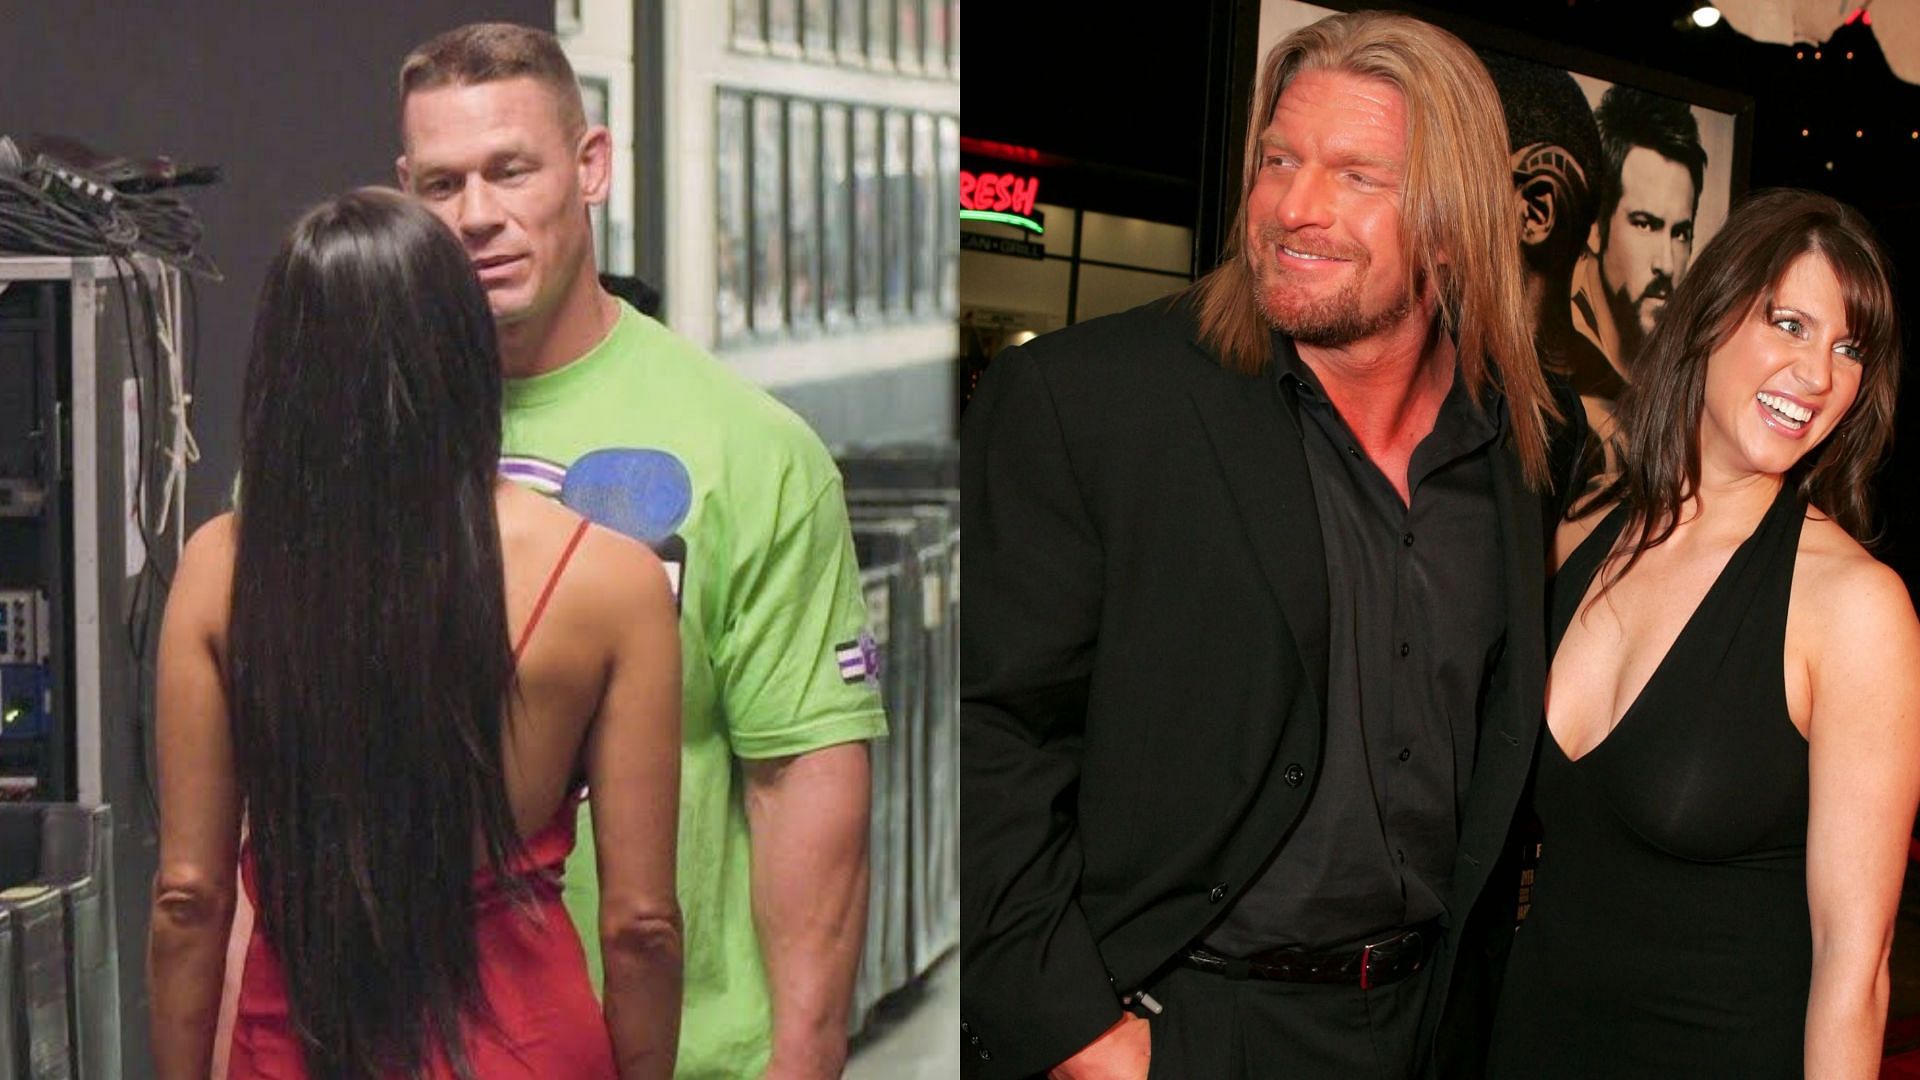 John Cena with Nikki Bella (left) and Triple H with Stephanie McMahon (right)